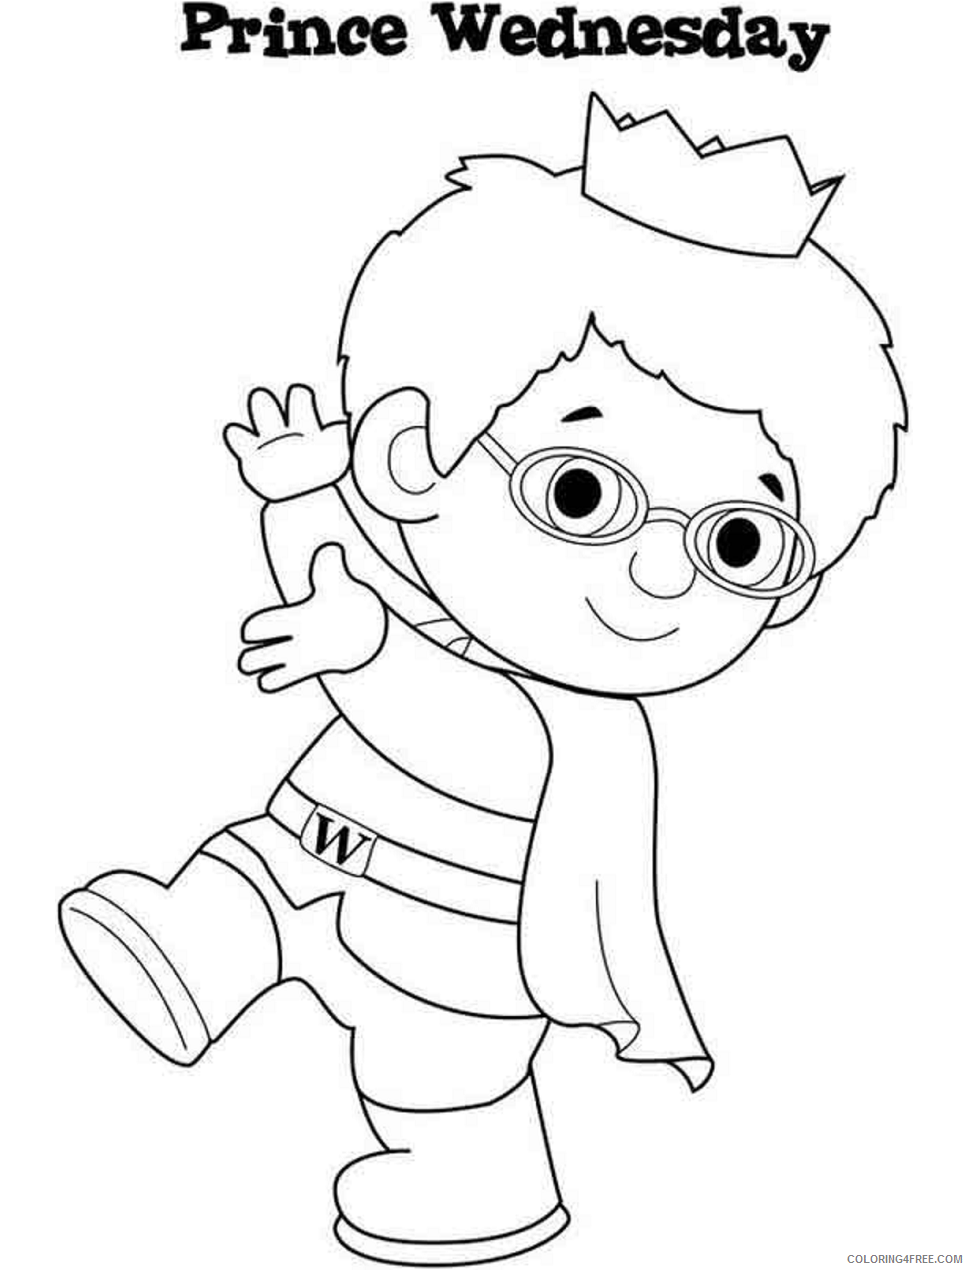 Prince Coloring Pages for Girls prince_wednesday Printable 2021 1025 Coloring4free